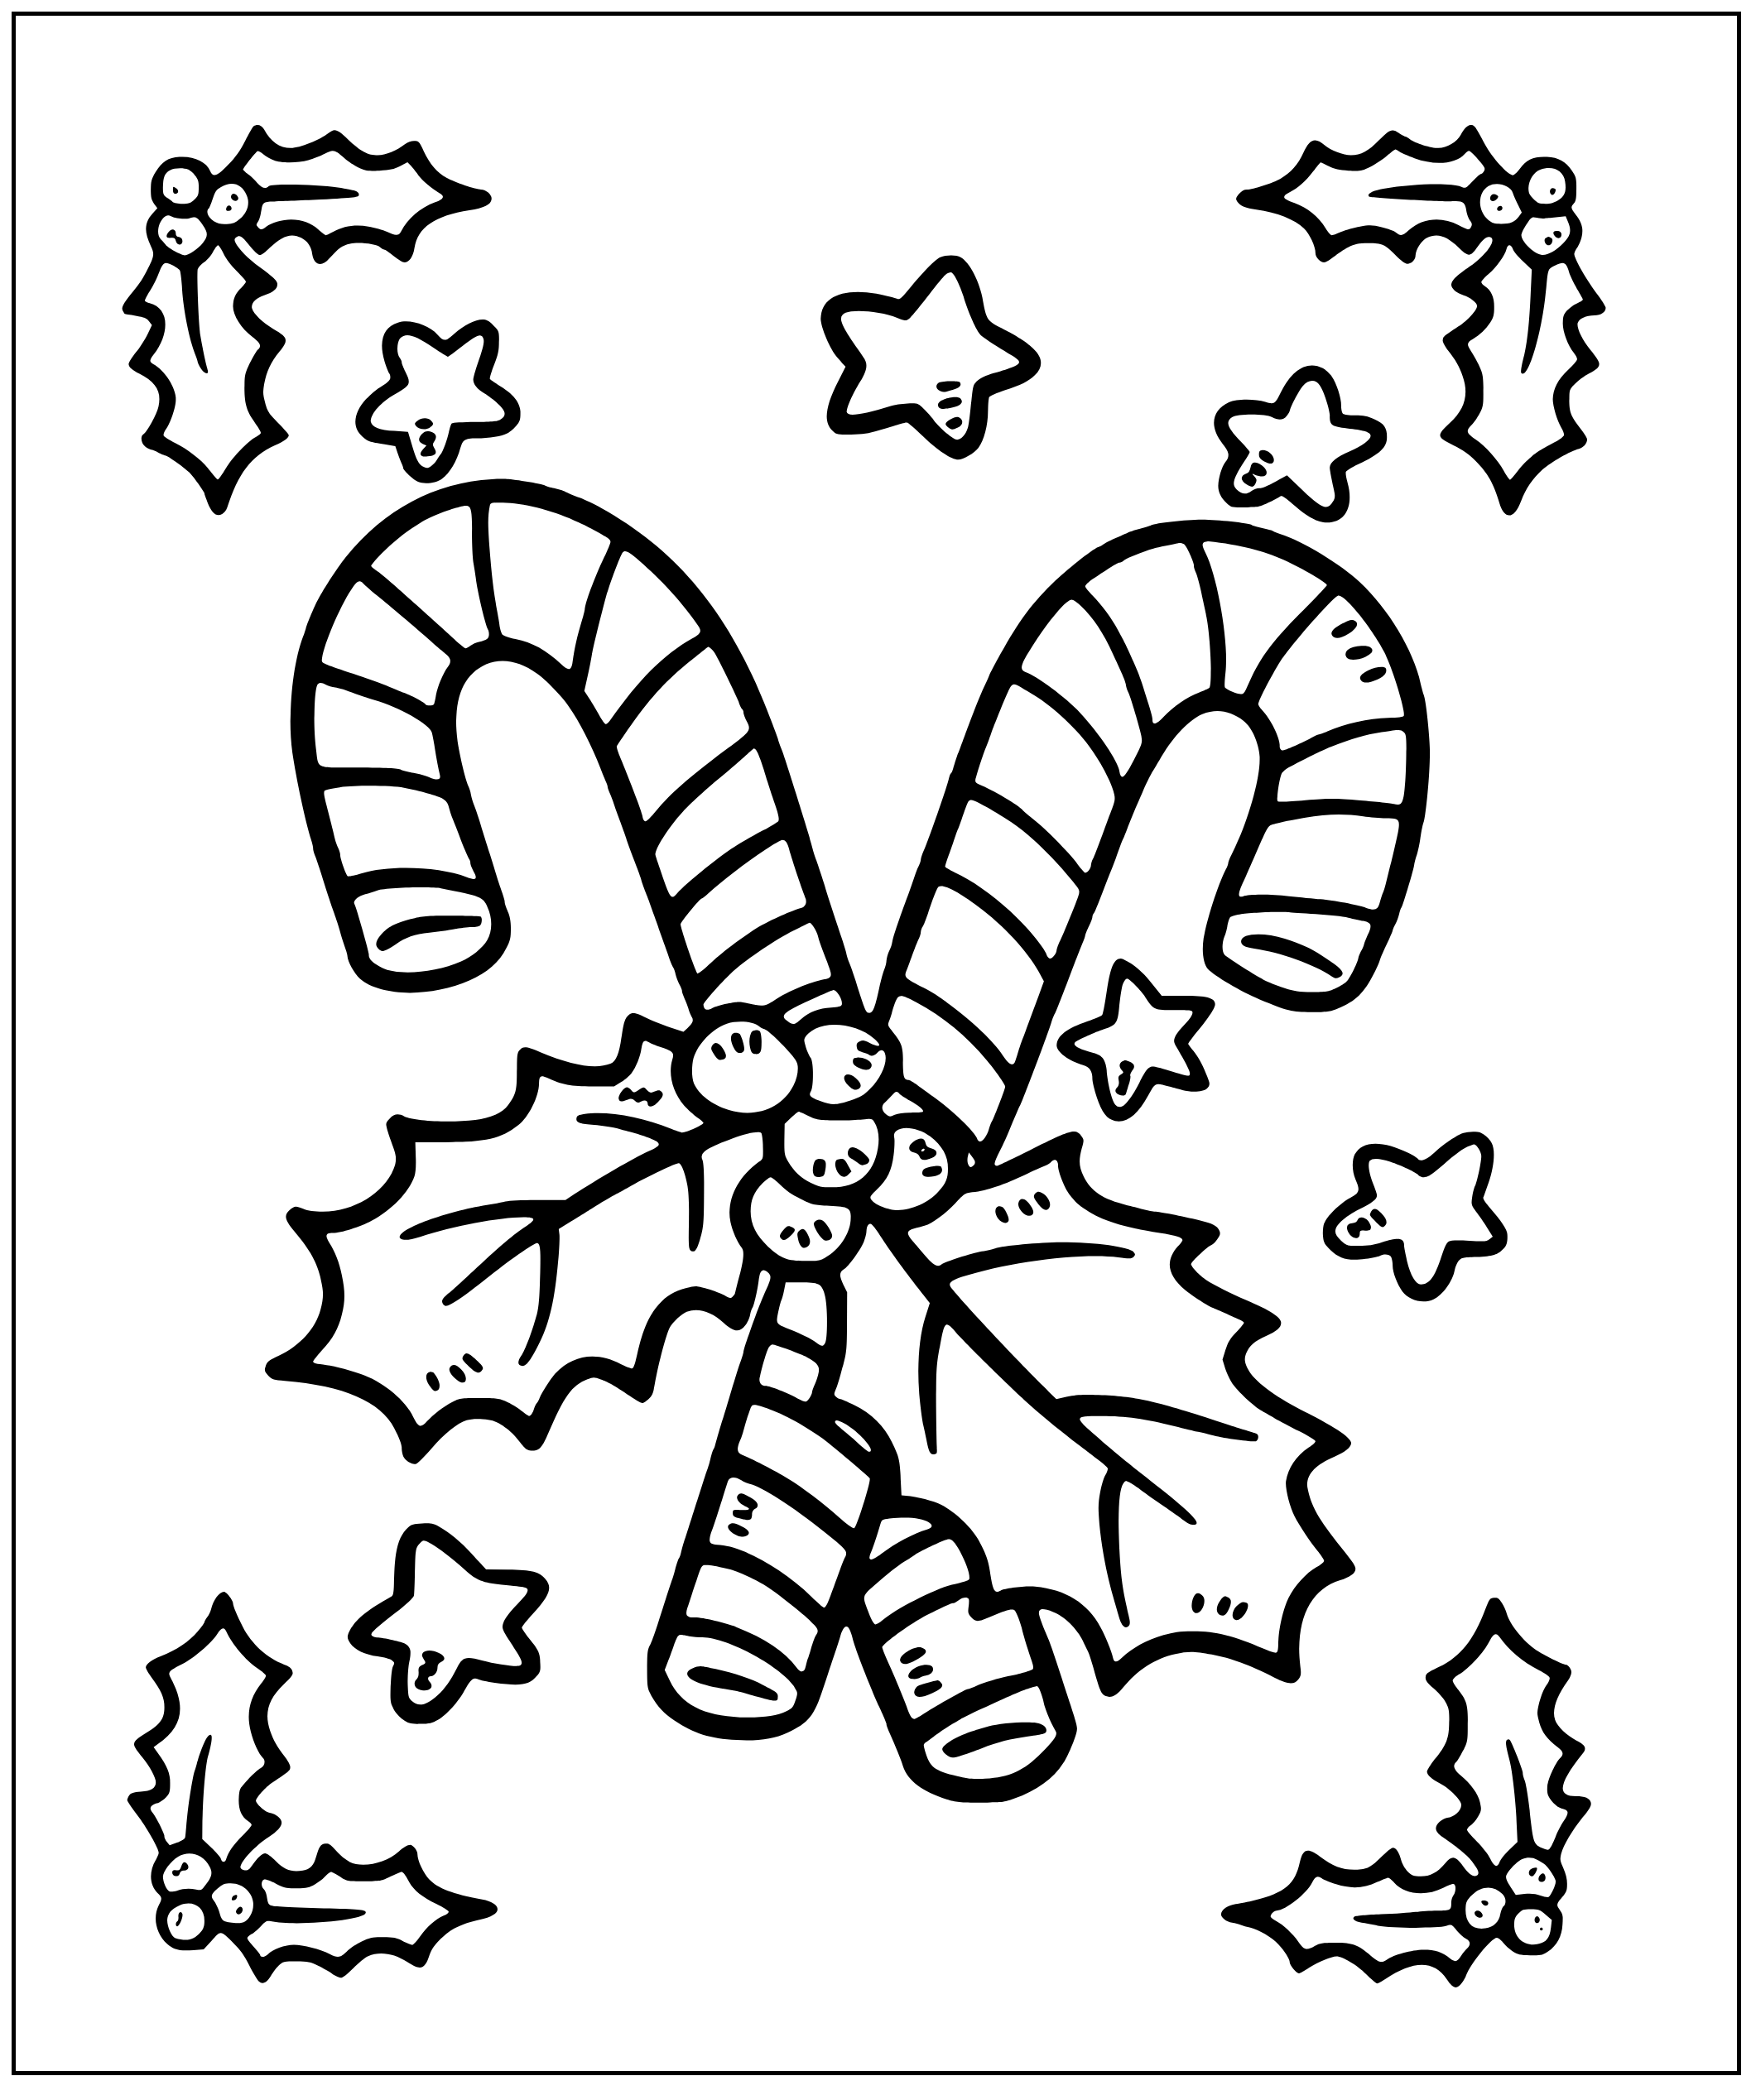 Printable Candy Canes Coloring Page for kids.